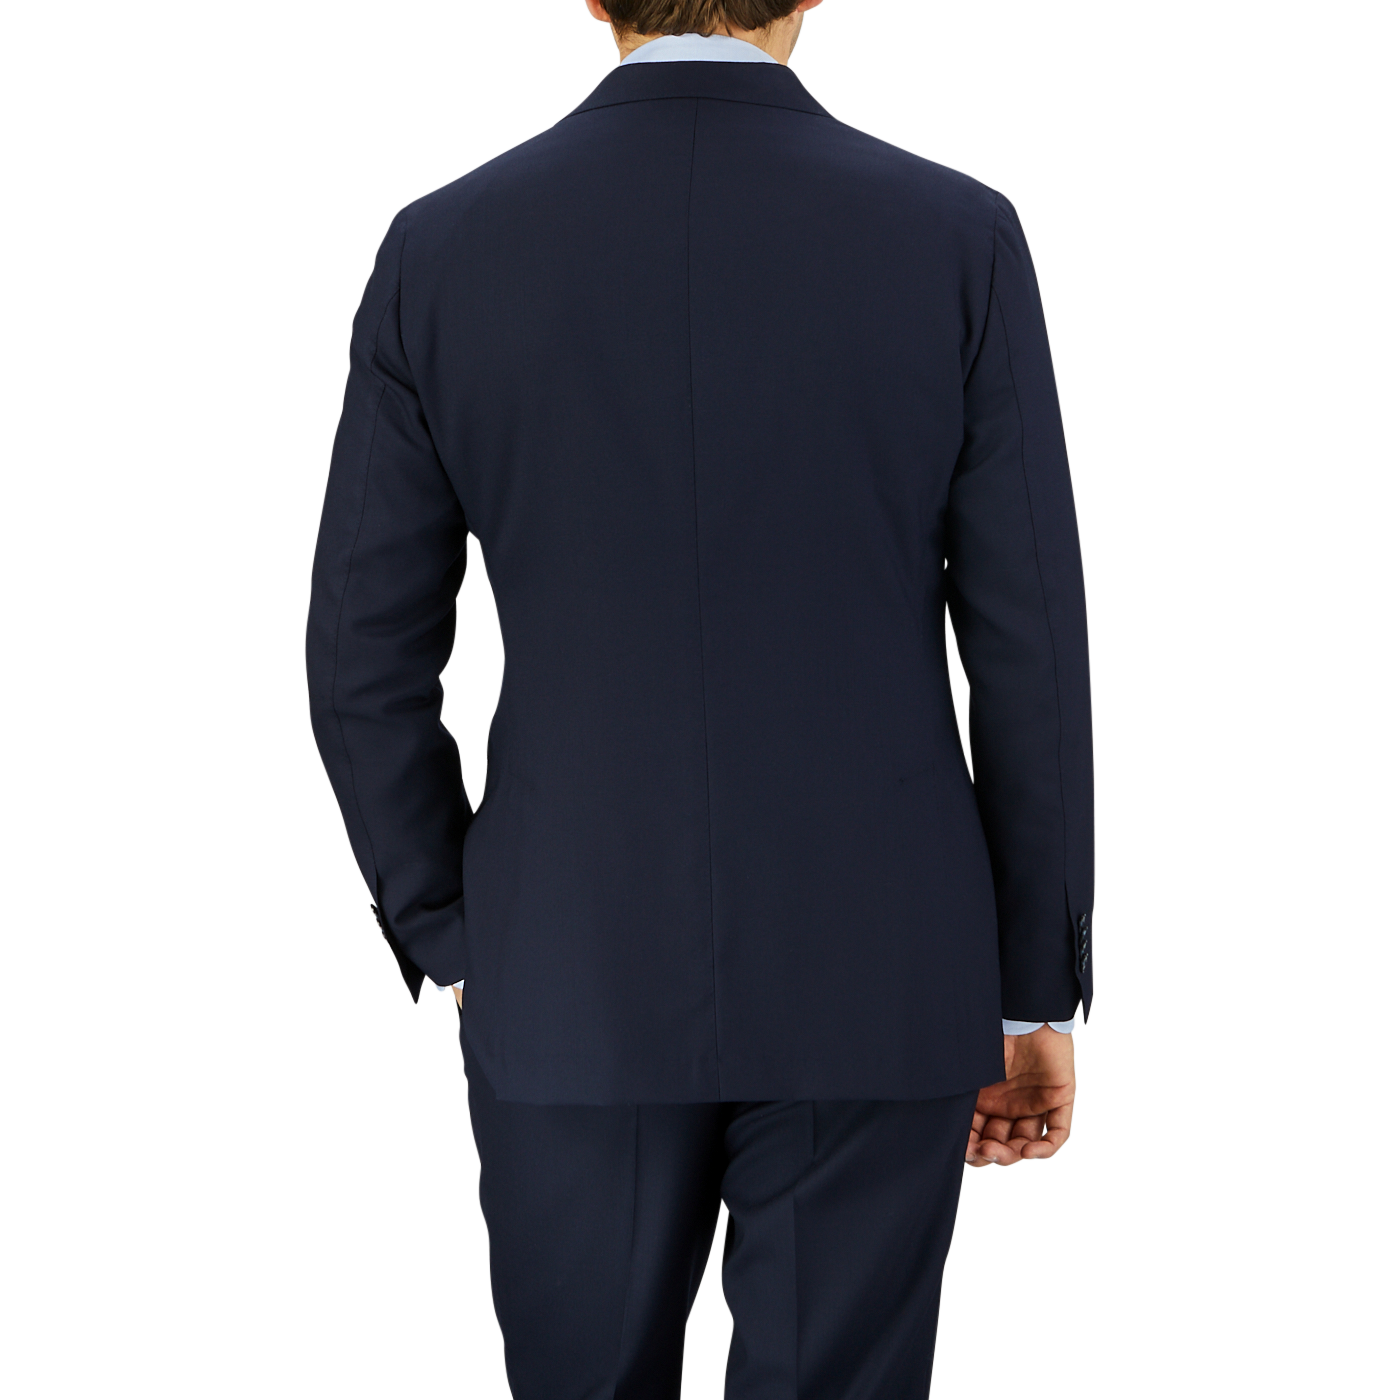 A man viewed from behind, wearing a well-fitted Navy Blue Super 100s Wool DB Suit Jacket by Baltzar Sartorial, standing against a striped, translucent background.